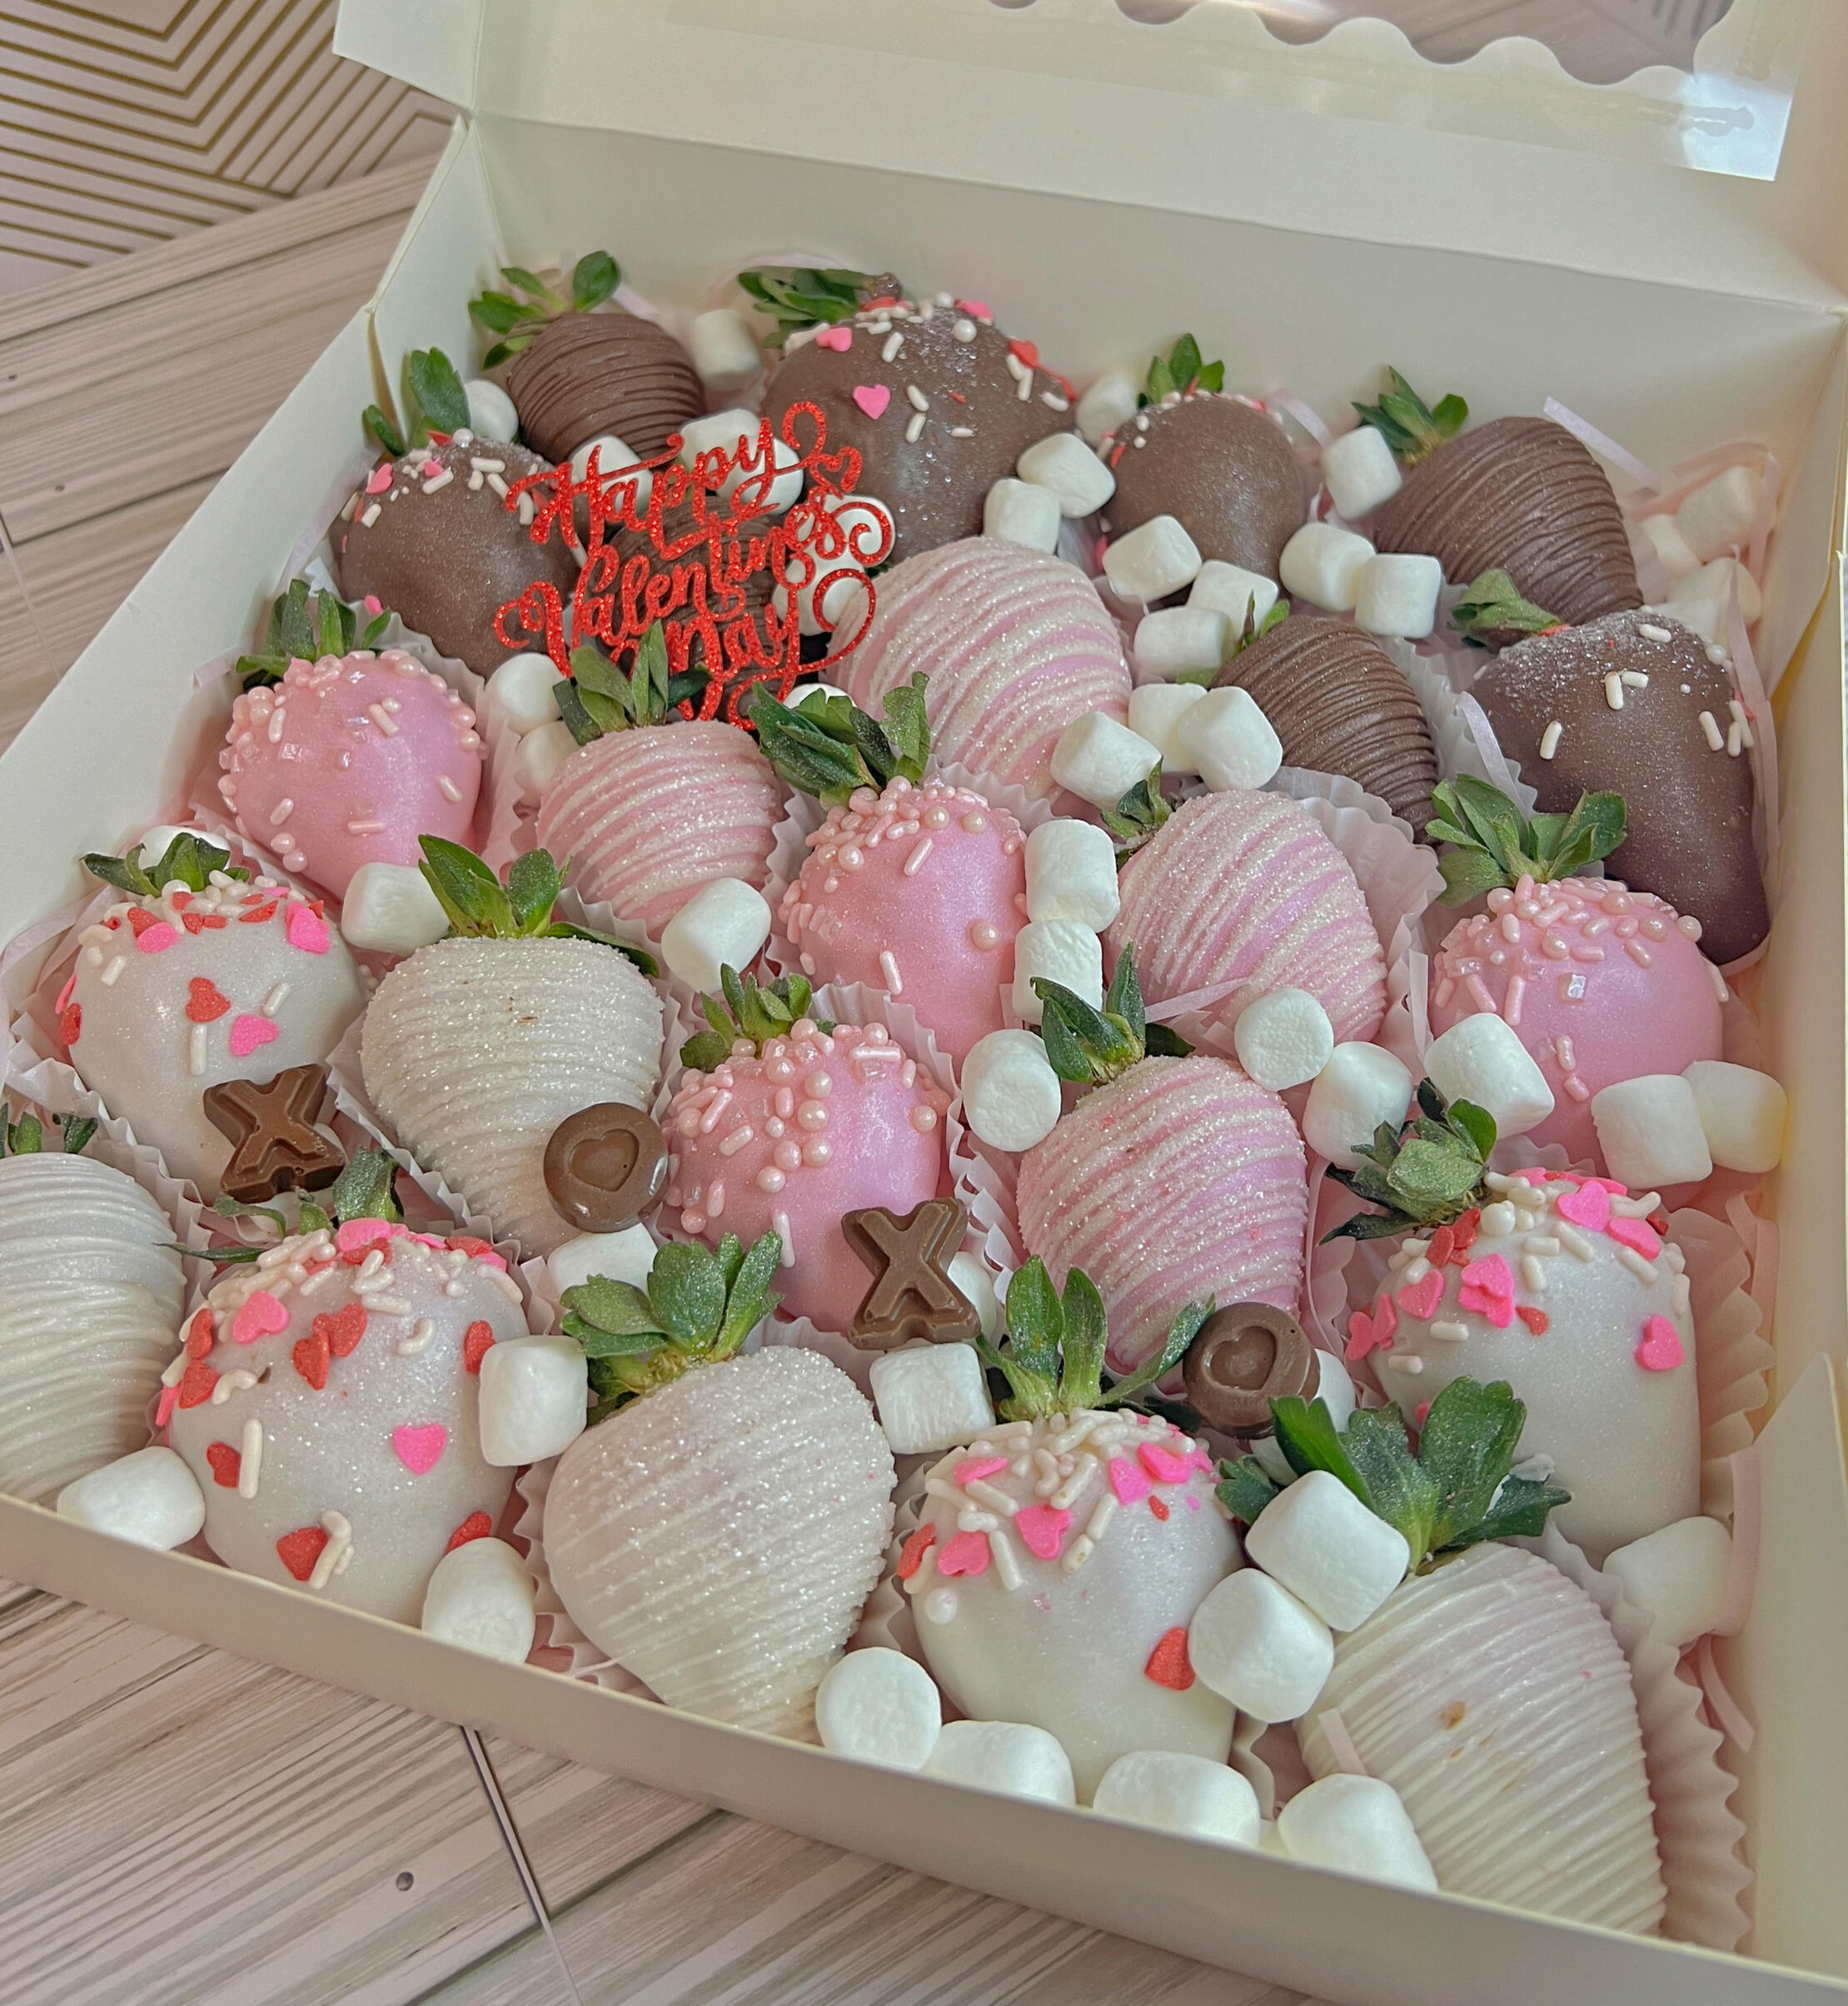 Delicious covered strawberries